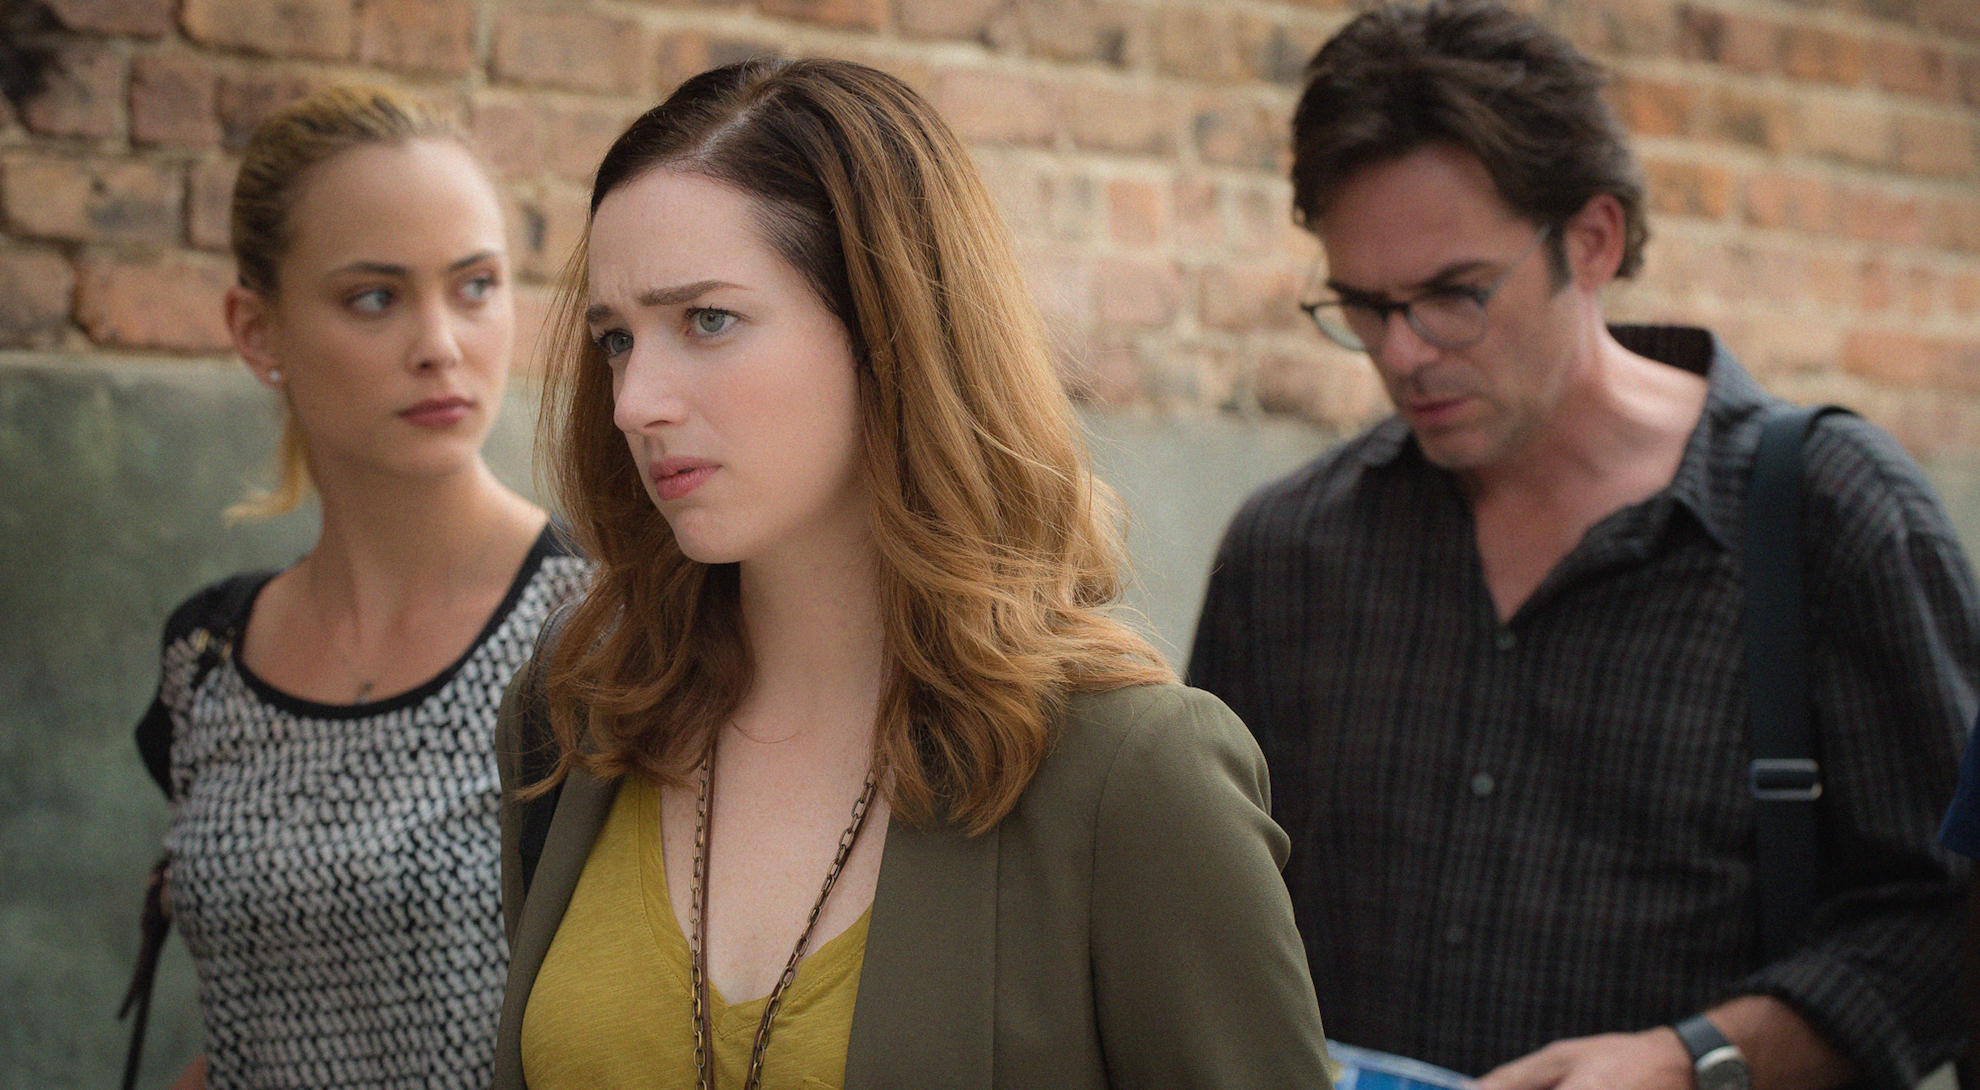 Nora Arnezeder as Chloe Tousignant, Kristen Connolly as Jamie Campbell, and Billy Burke as Mitch Morgan.